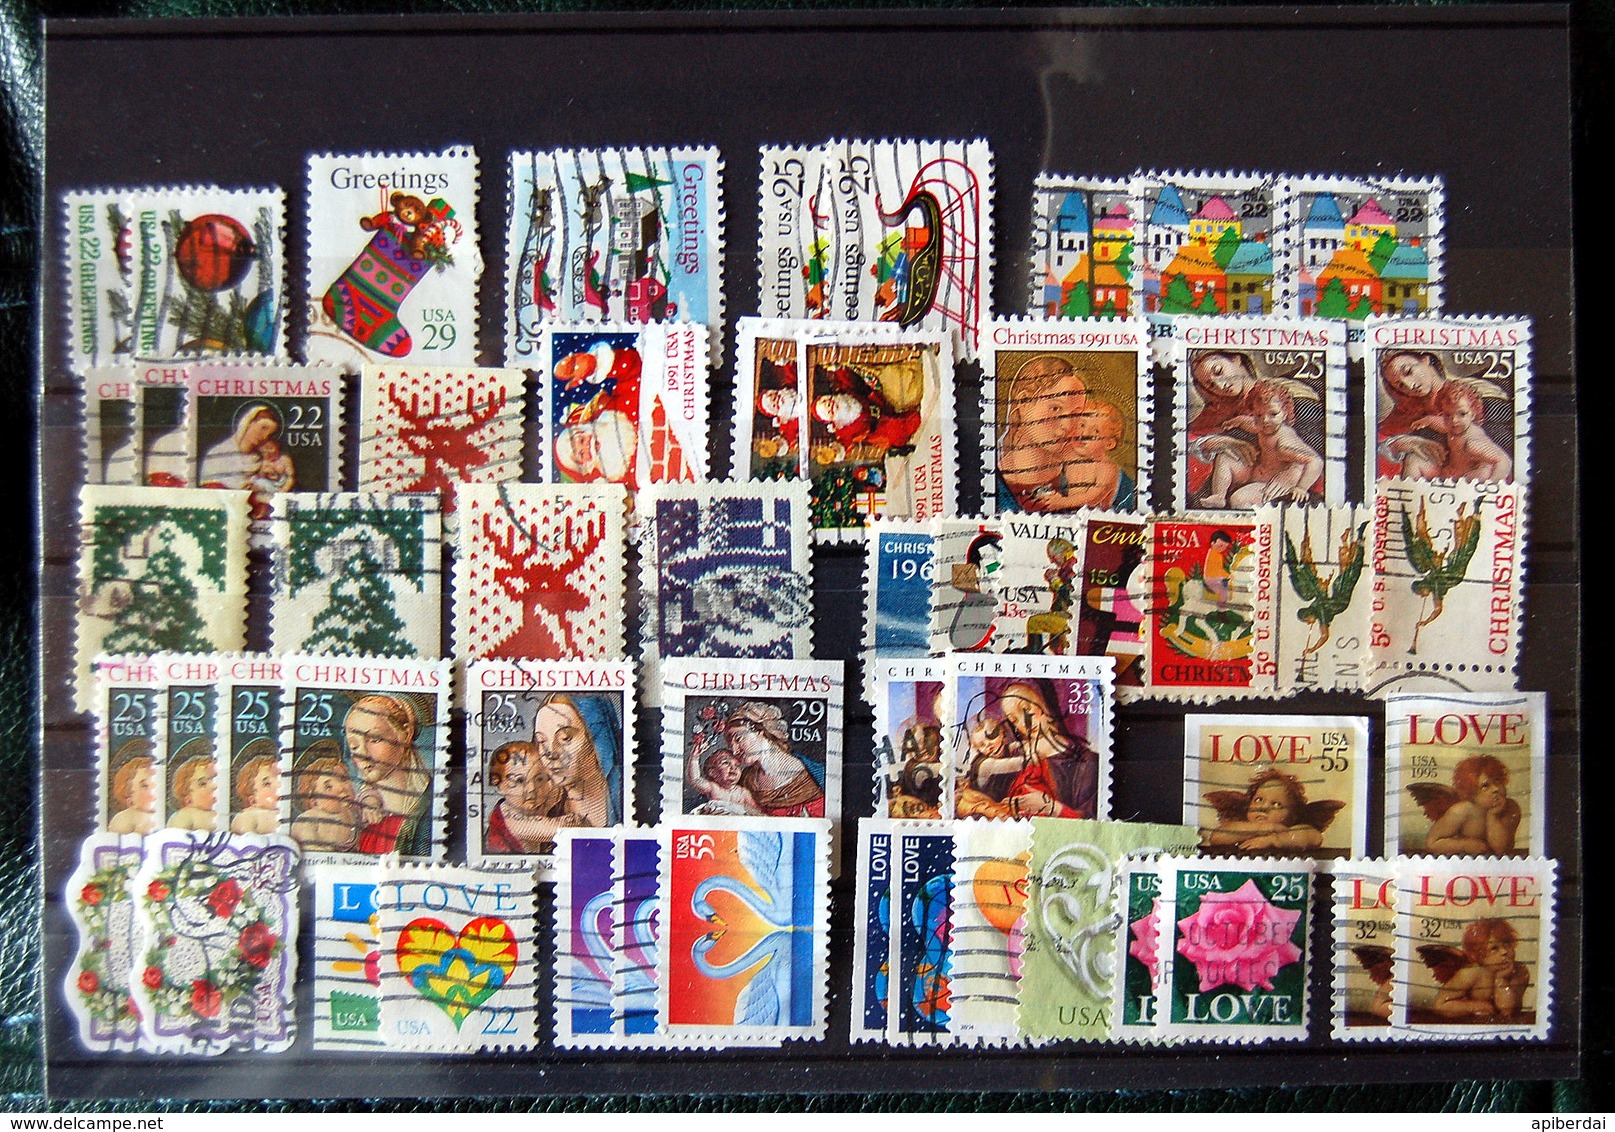 USA - Batch Of 56 Stamps With The Thema Of Christmas, Greetings And Love  (used) - Gebraucht